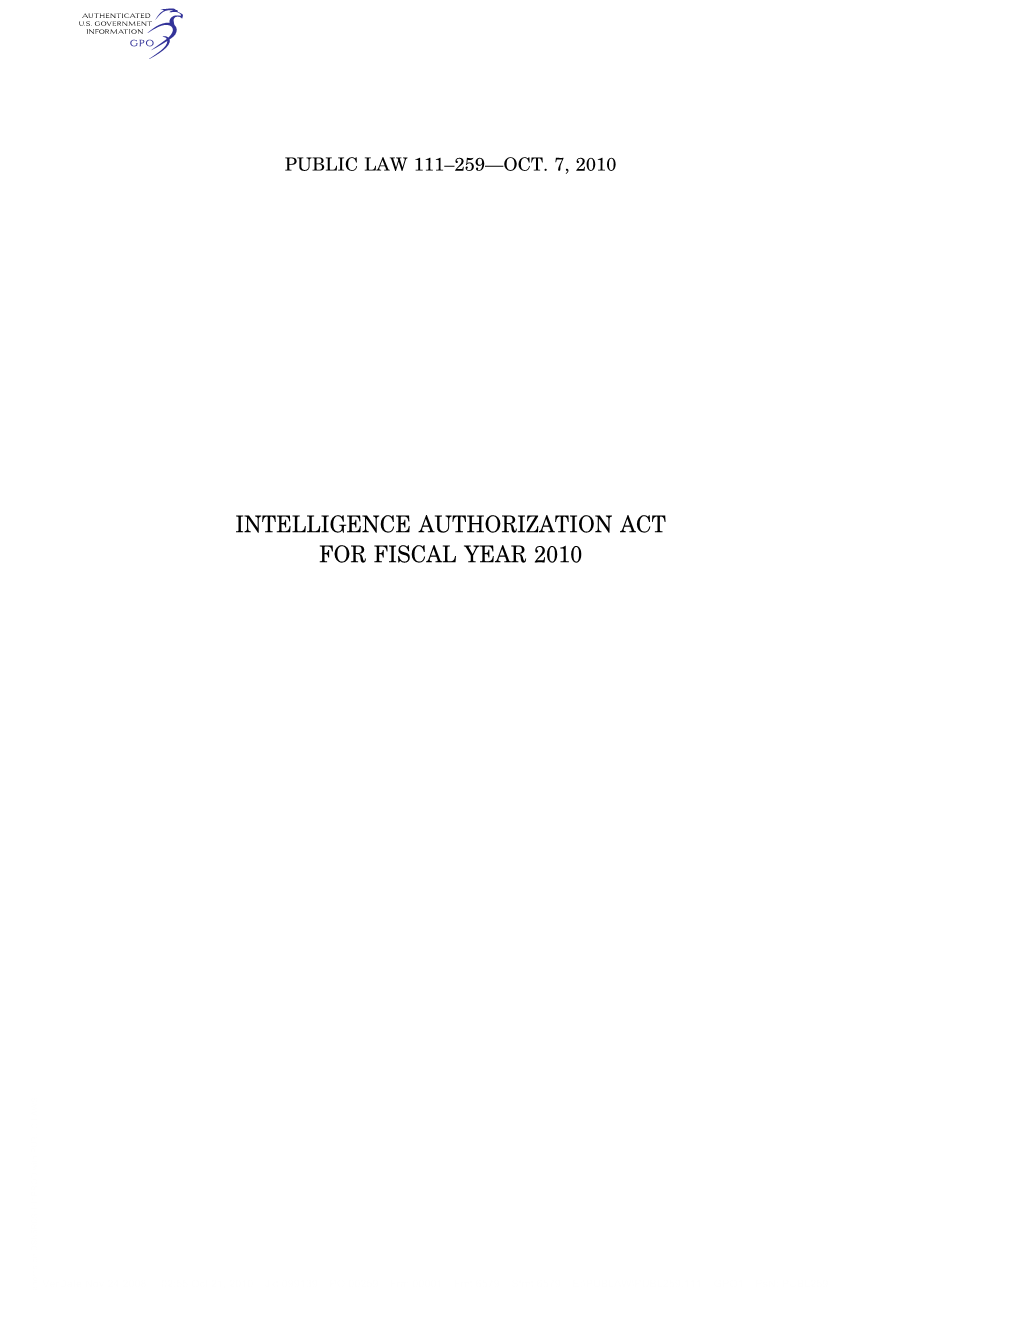 Intelligence Authorization Act for Fiscal Year 2010